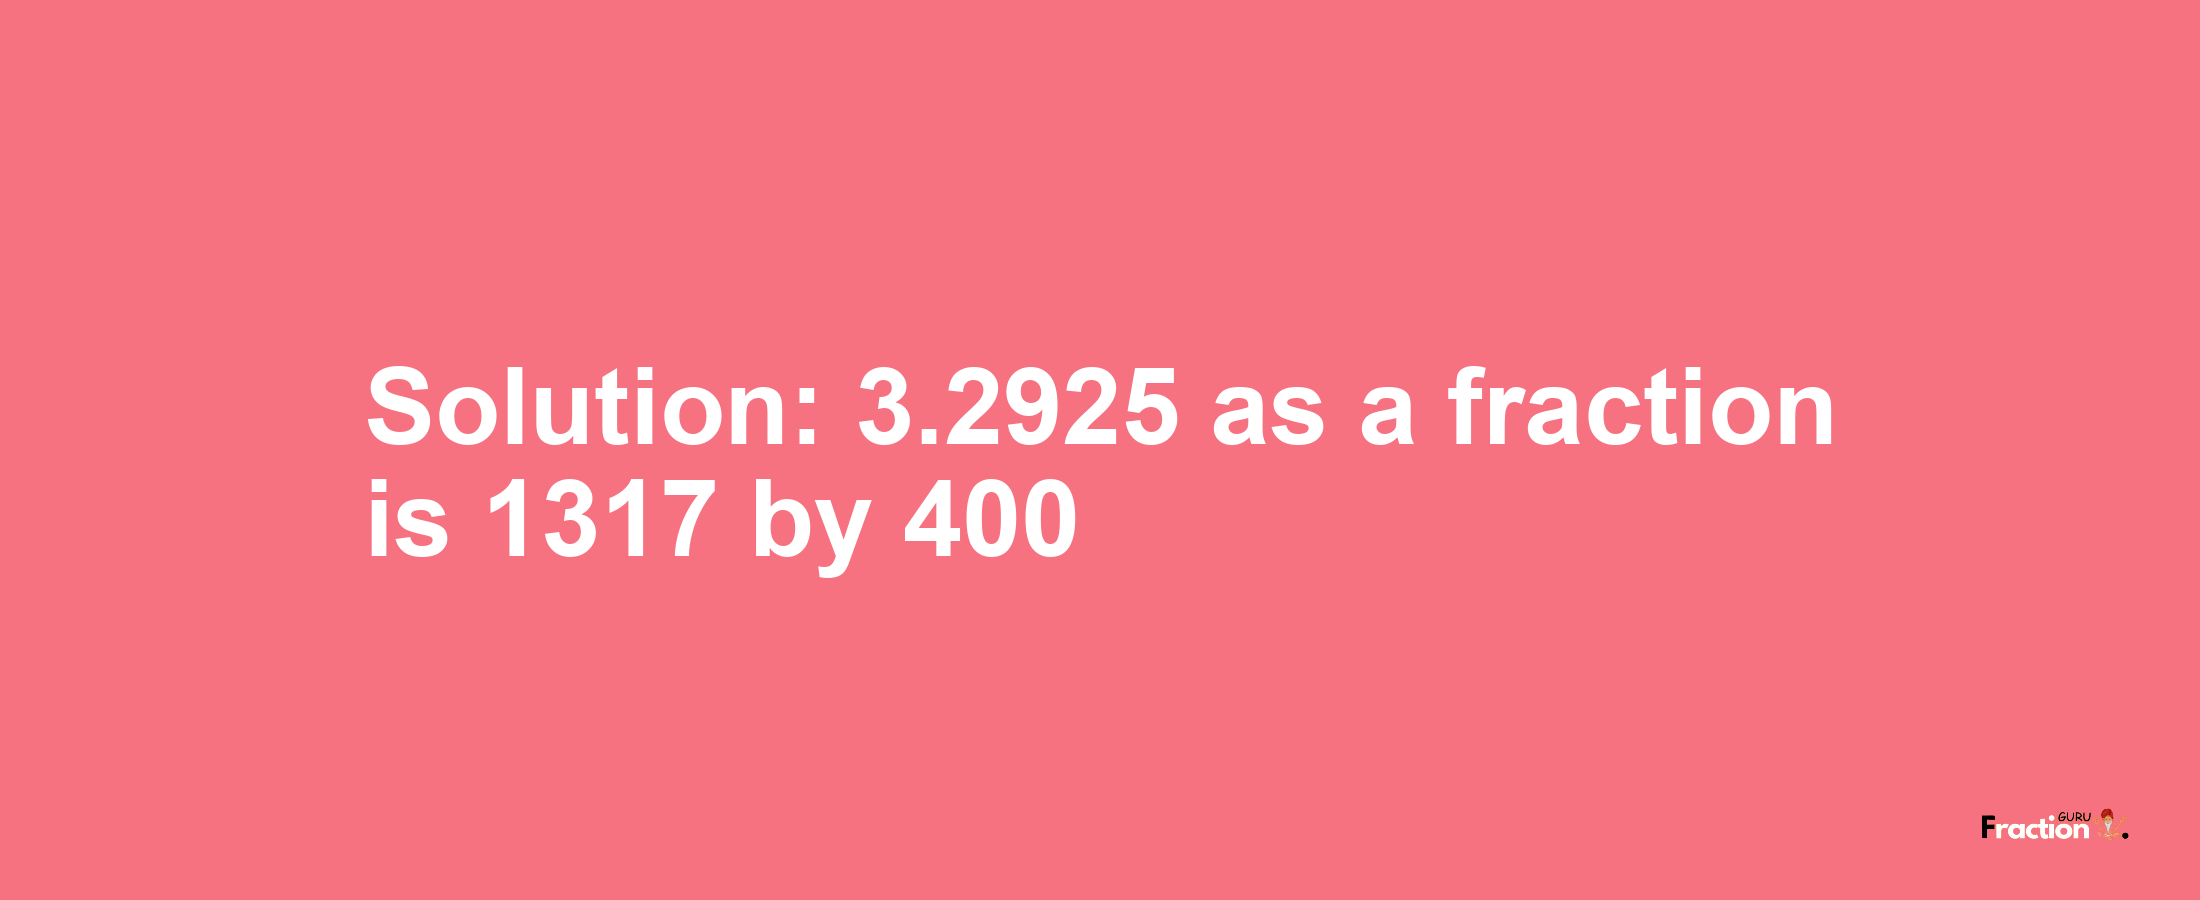 Solution:3.2925 as a fraction is 1317/400